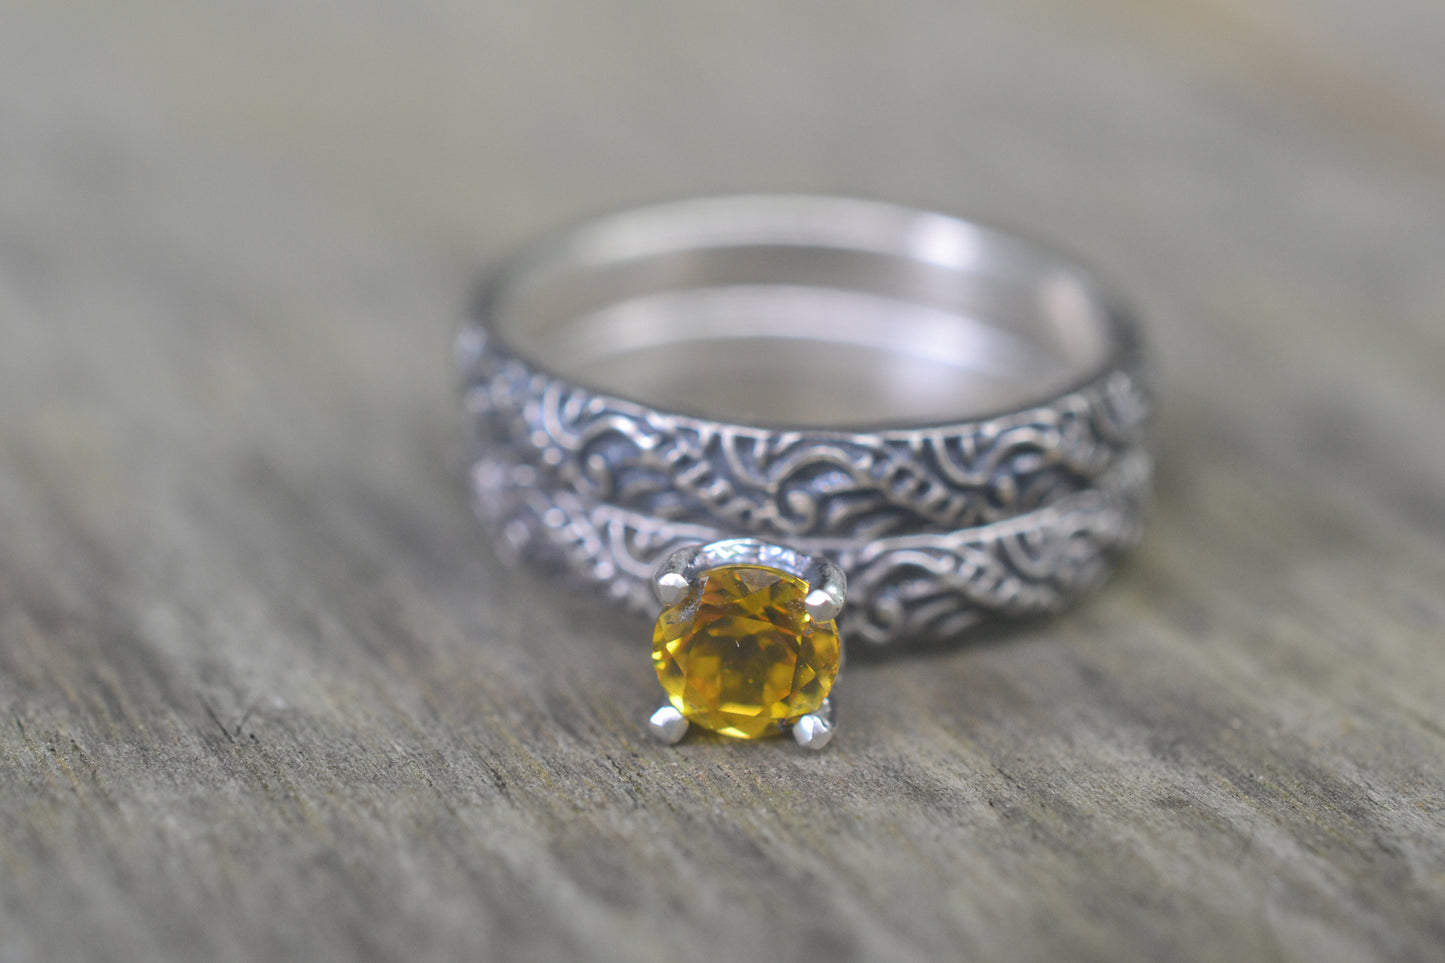 5mm Yellow Sapphire Bridal Set in Sterling